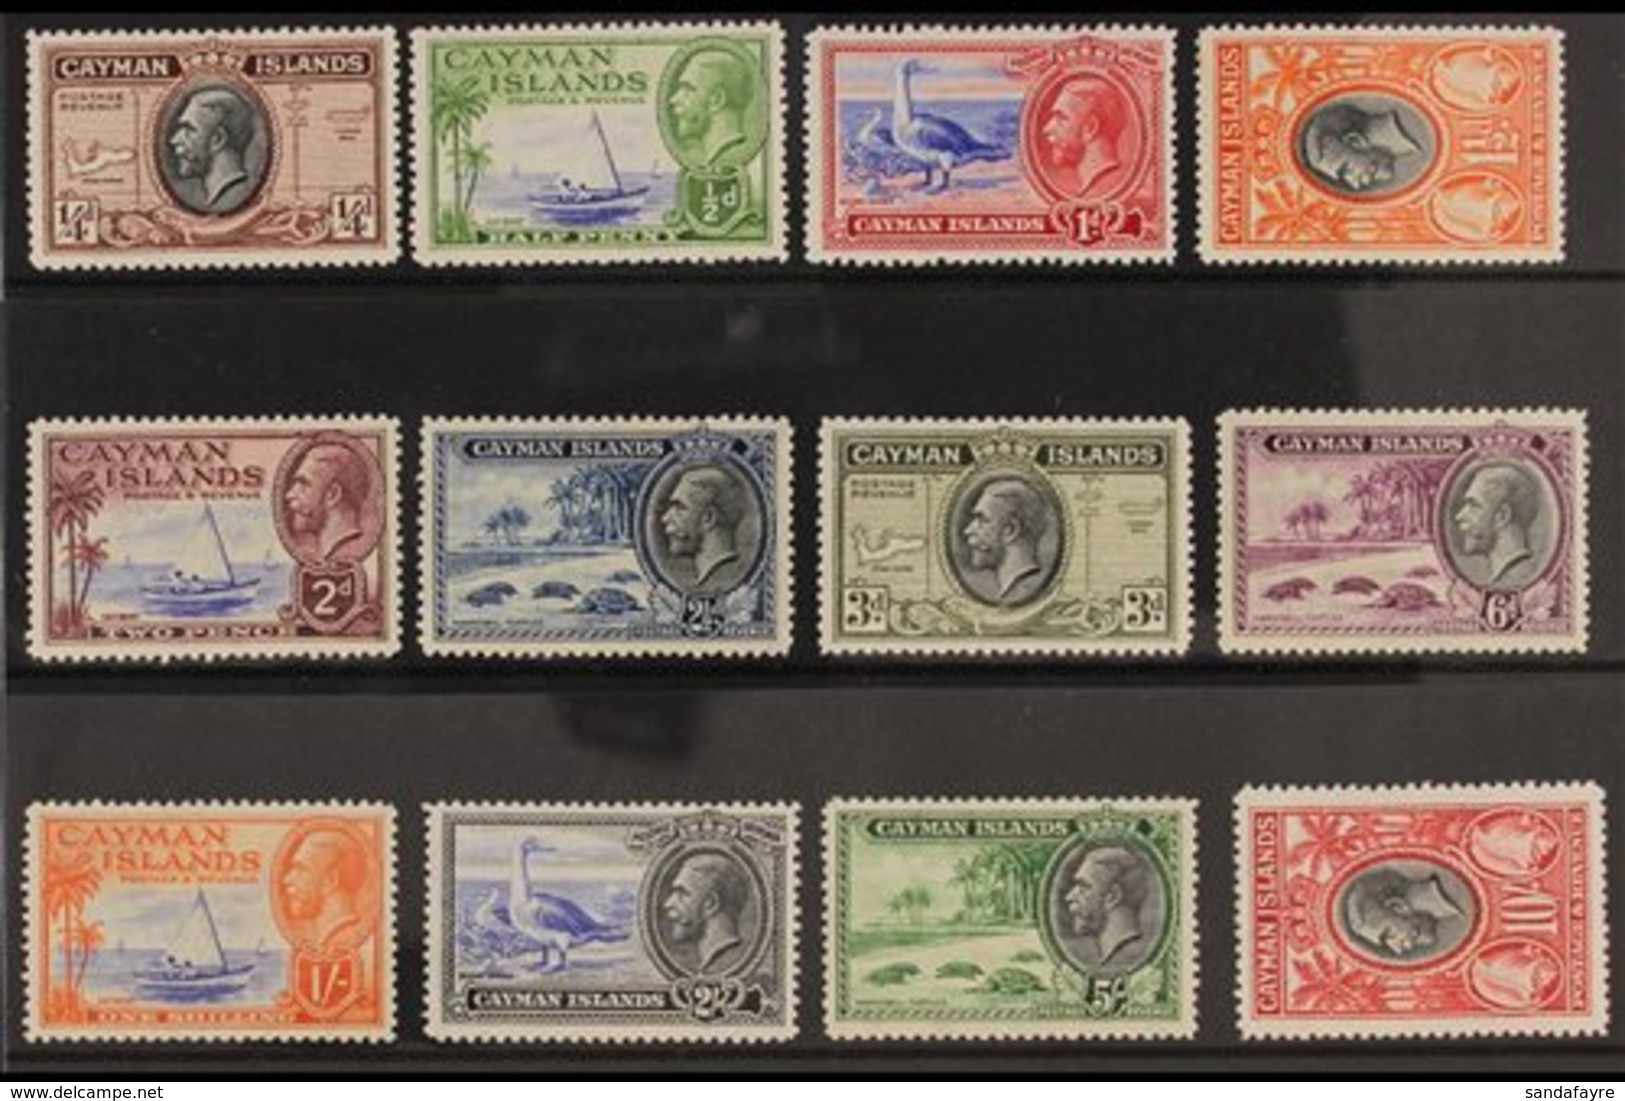 1935 KGV Pictorial Set Complete, SG 96/107, Very Fine Mint With Vibrant Colours (12 Stamps) For More Images, Please Visi - Kaaiman Eilanden